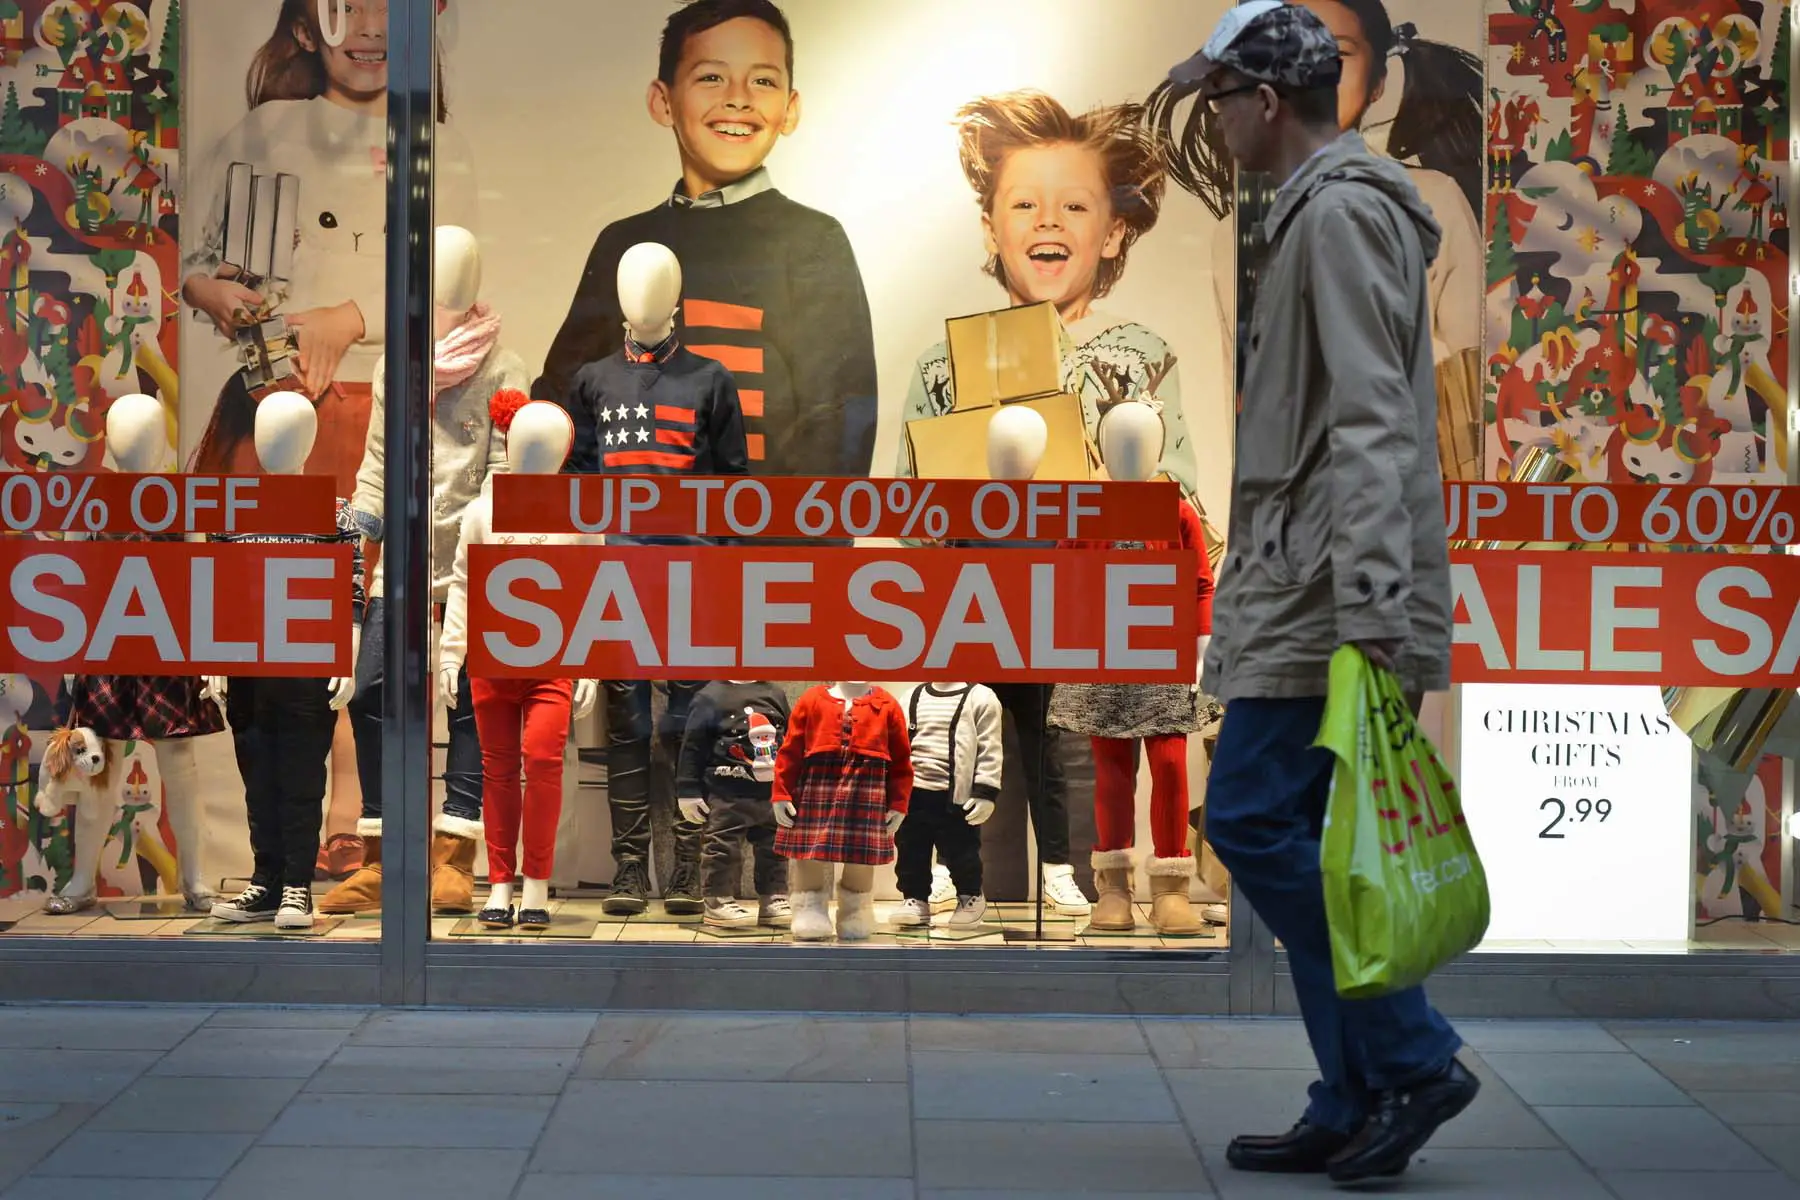 man walking past sale signs in shop windows in the UK